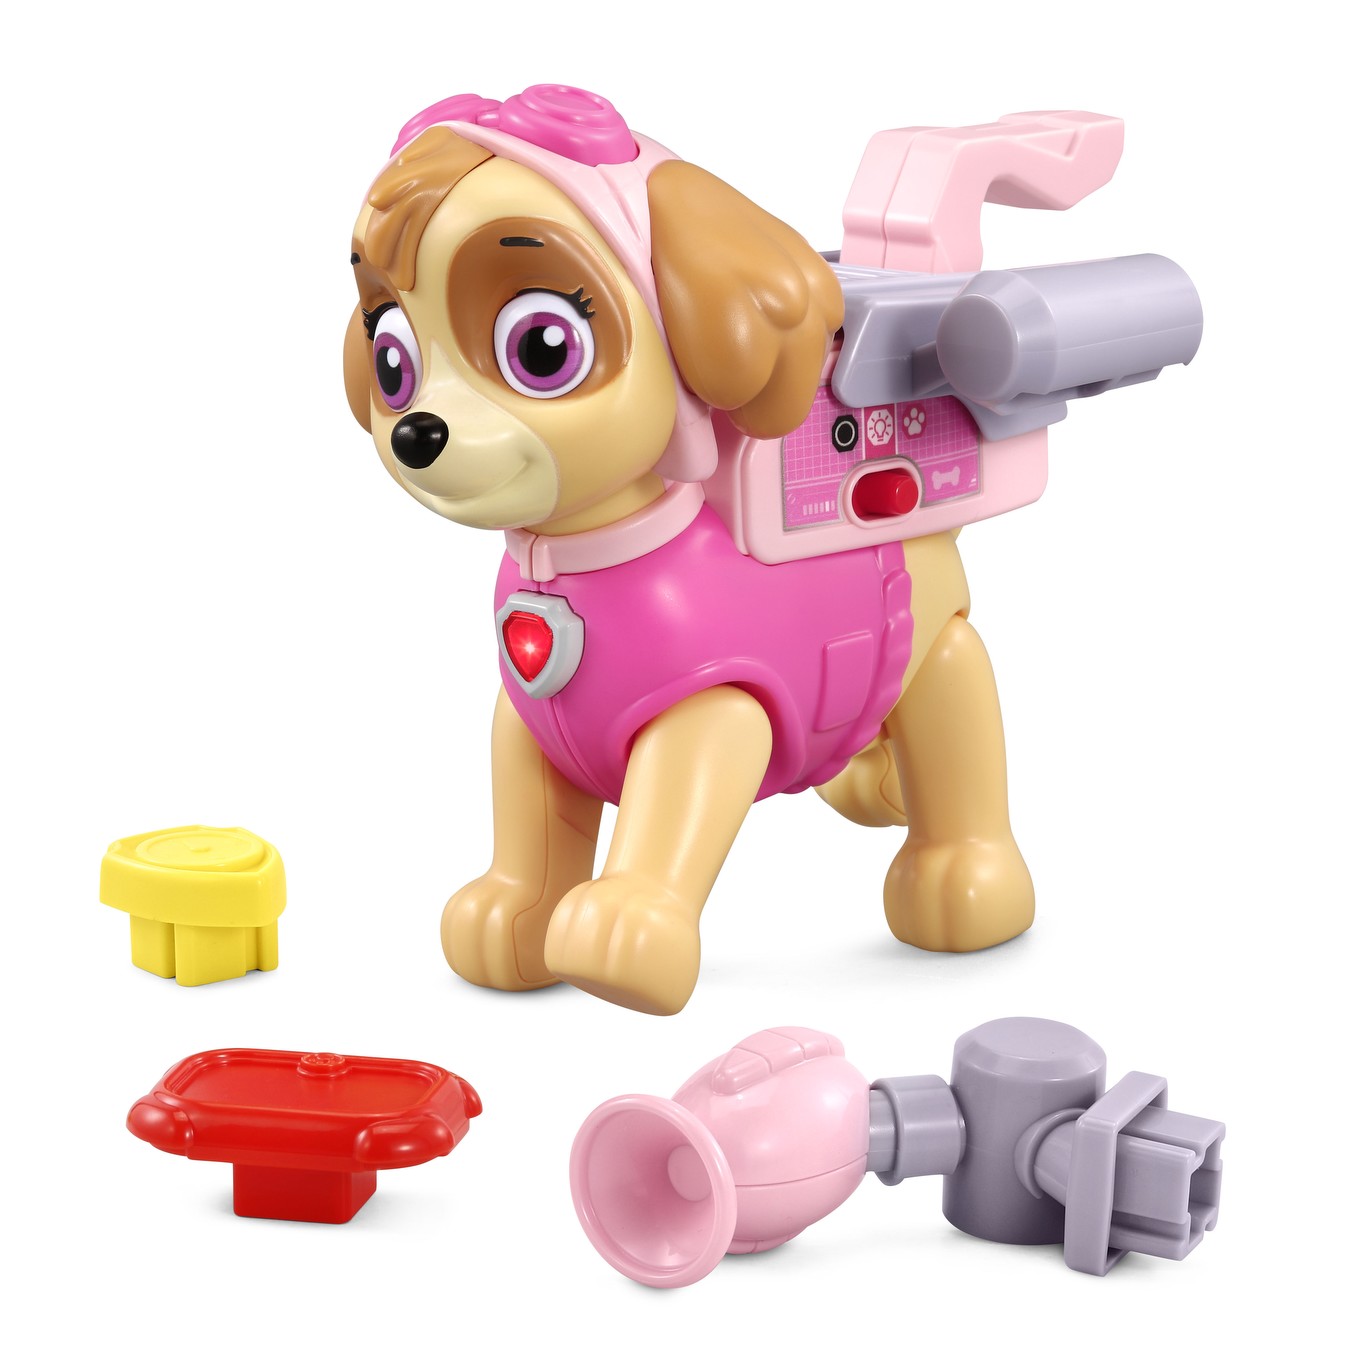 VTech® PAW Patrol Skye to the Rescue With Tools for Preschoolers